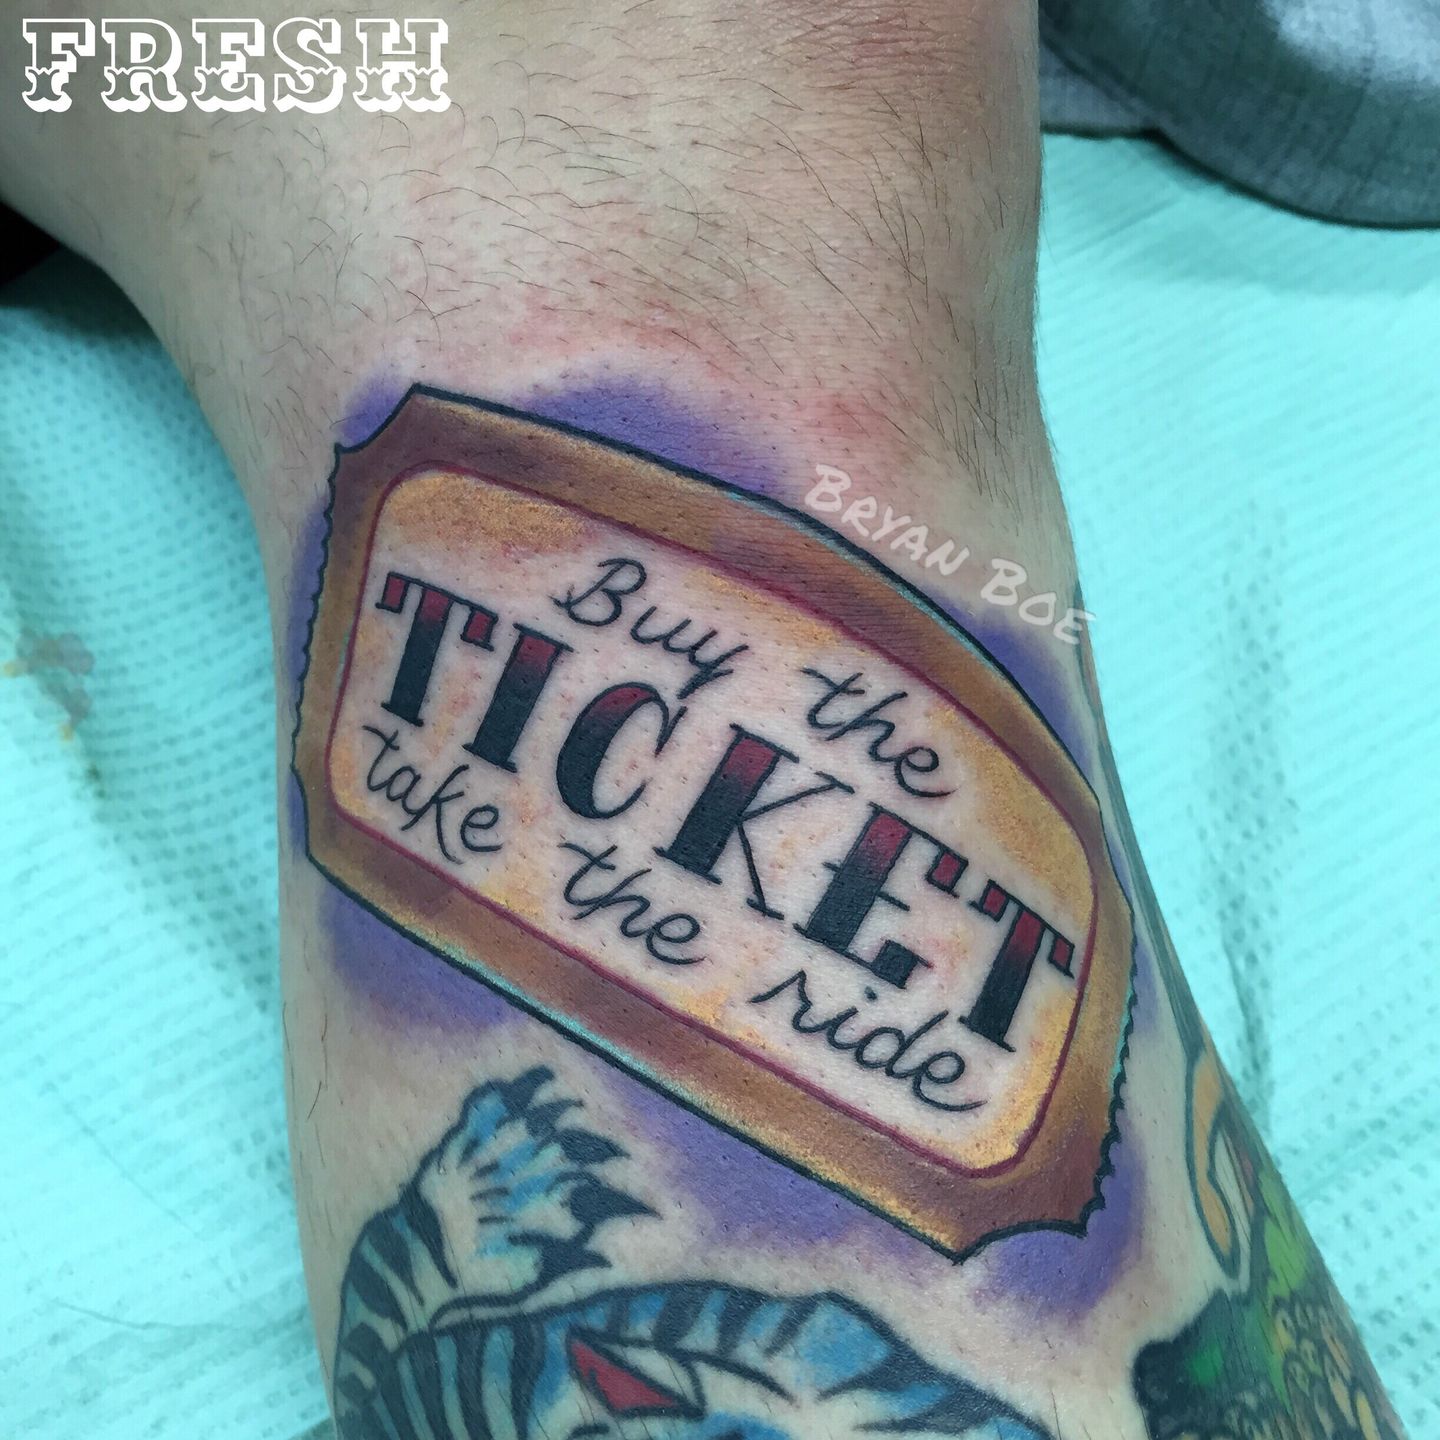 Corey Taylor Quotes Check out Coreys new tattoo Hunter S